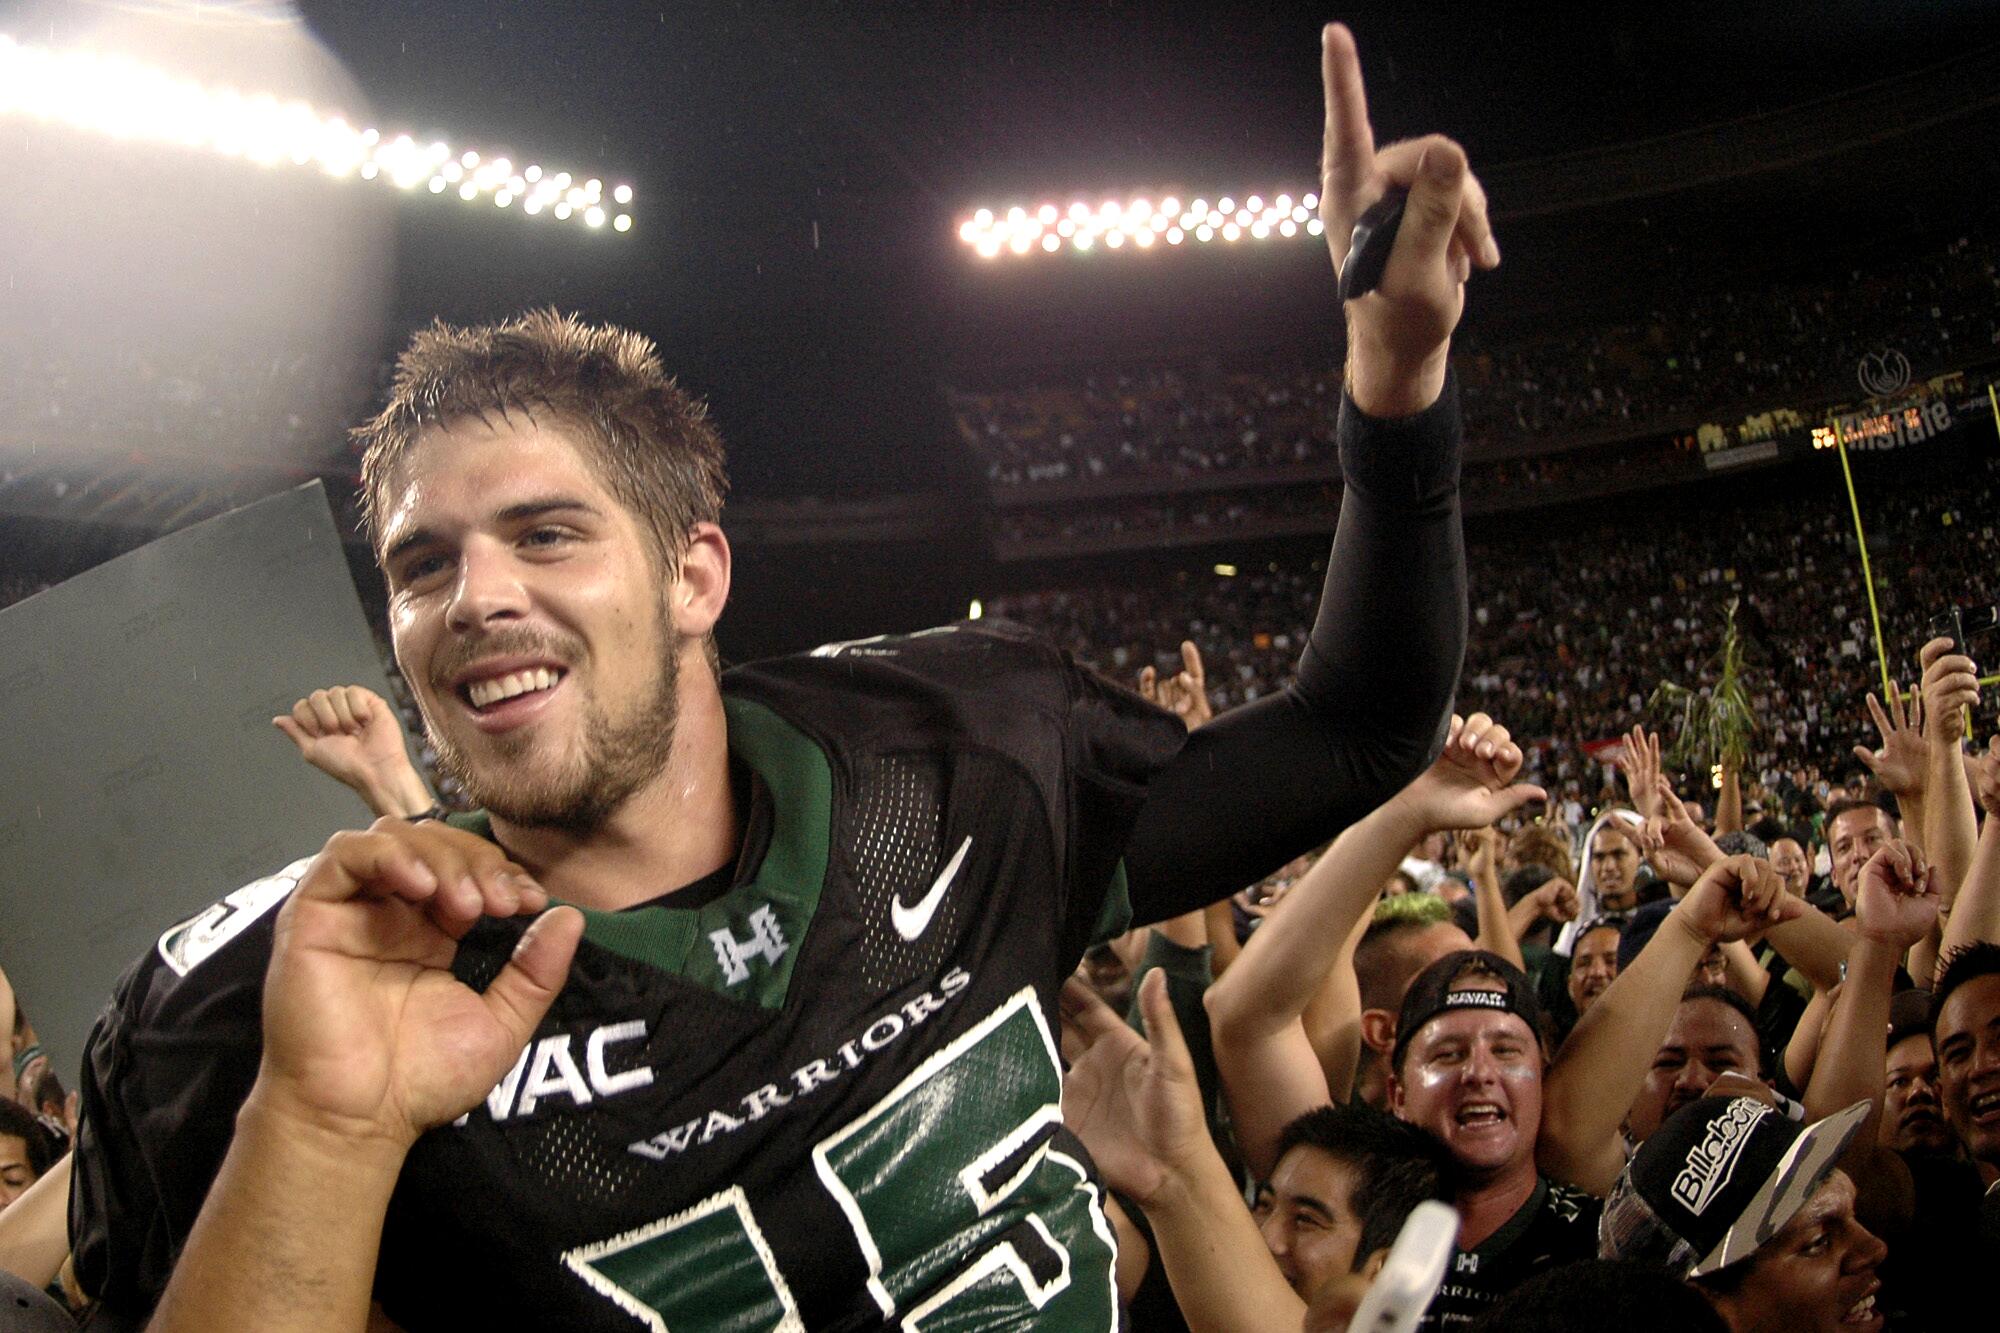 Colt Brennan celebrates after leading Hawaii to victory over Boise State on Nov. 23, 2007.